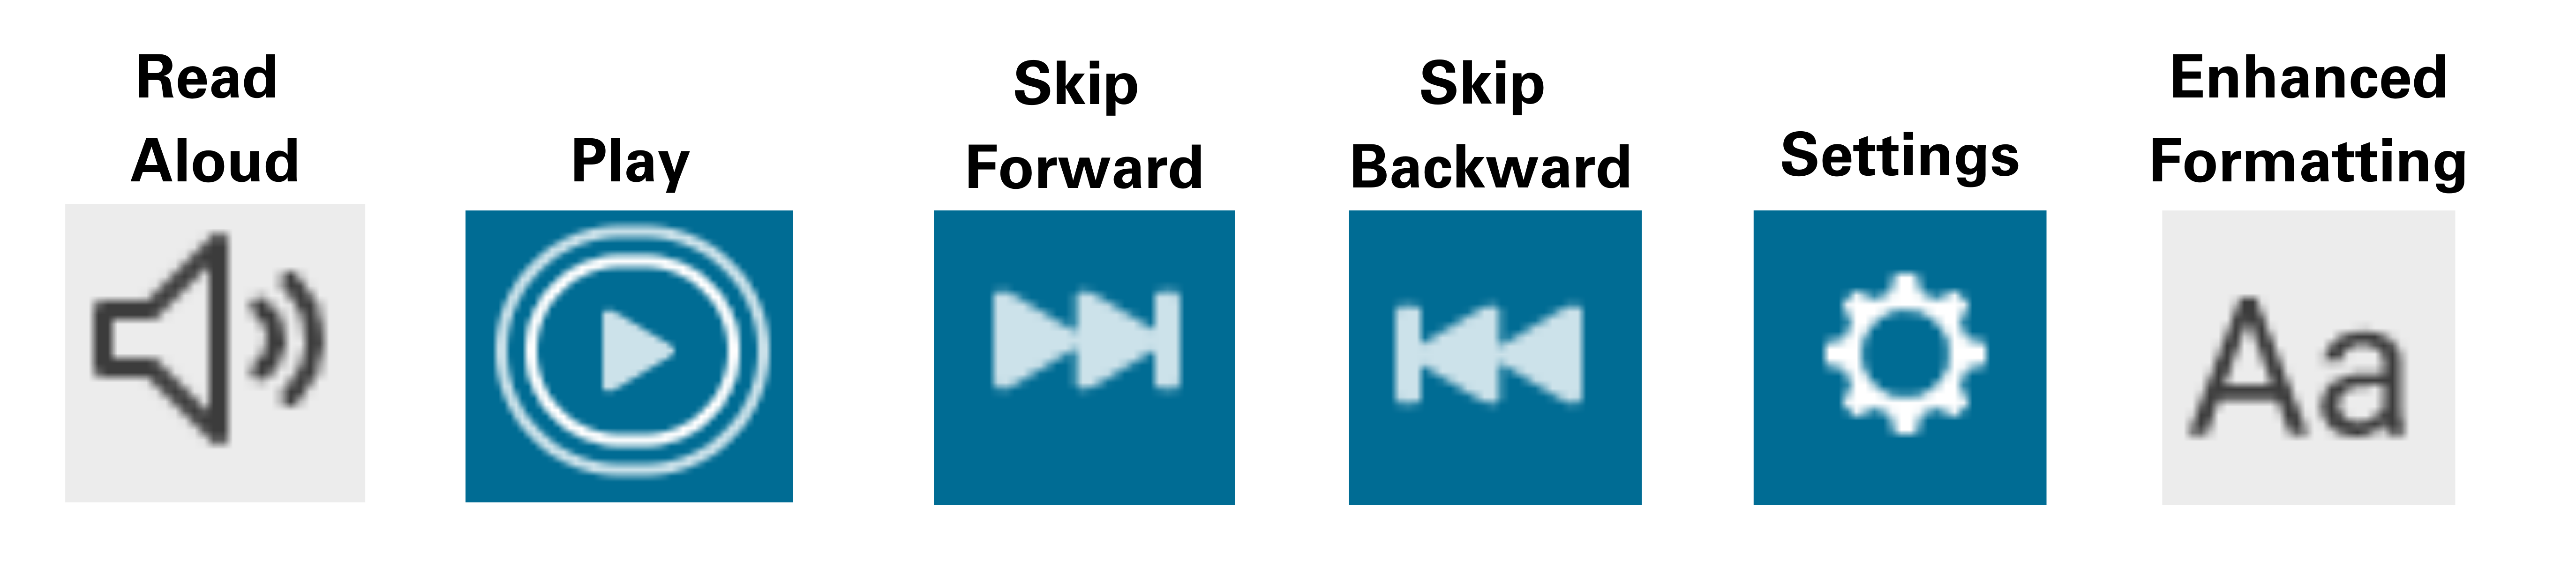 This displays the six icons a person can expect to see if using the UDL features in Immediate Access.